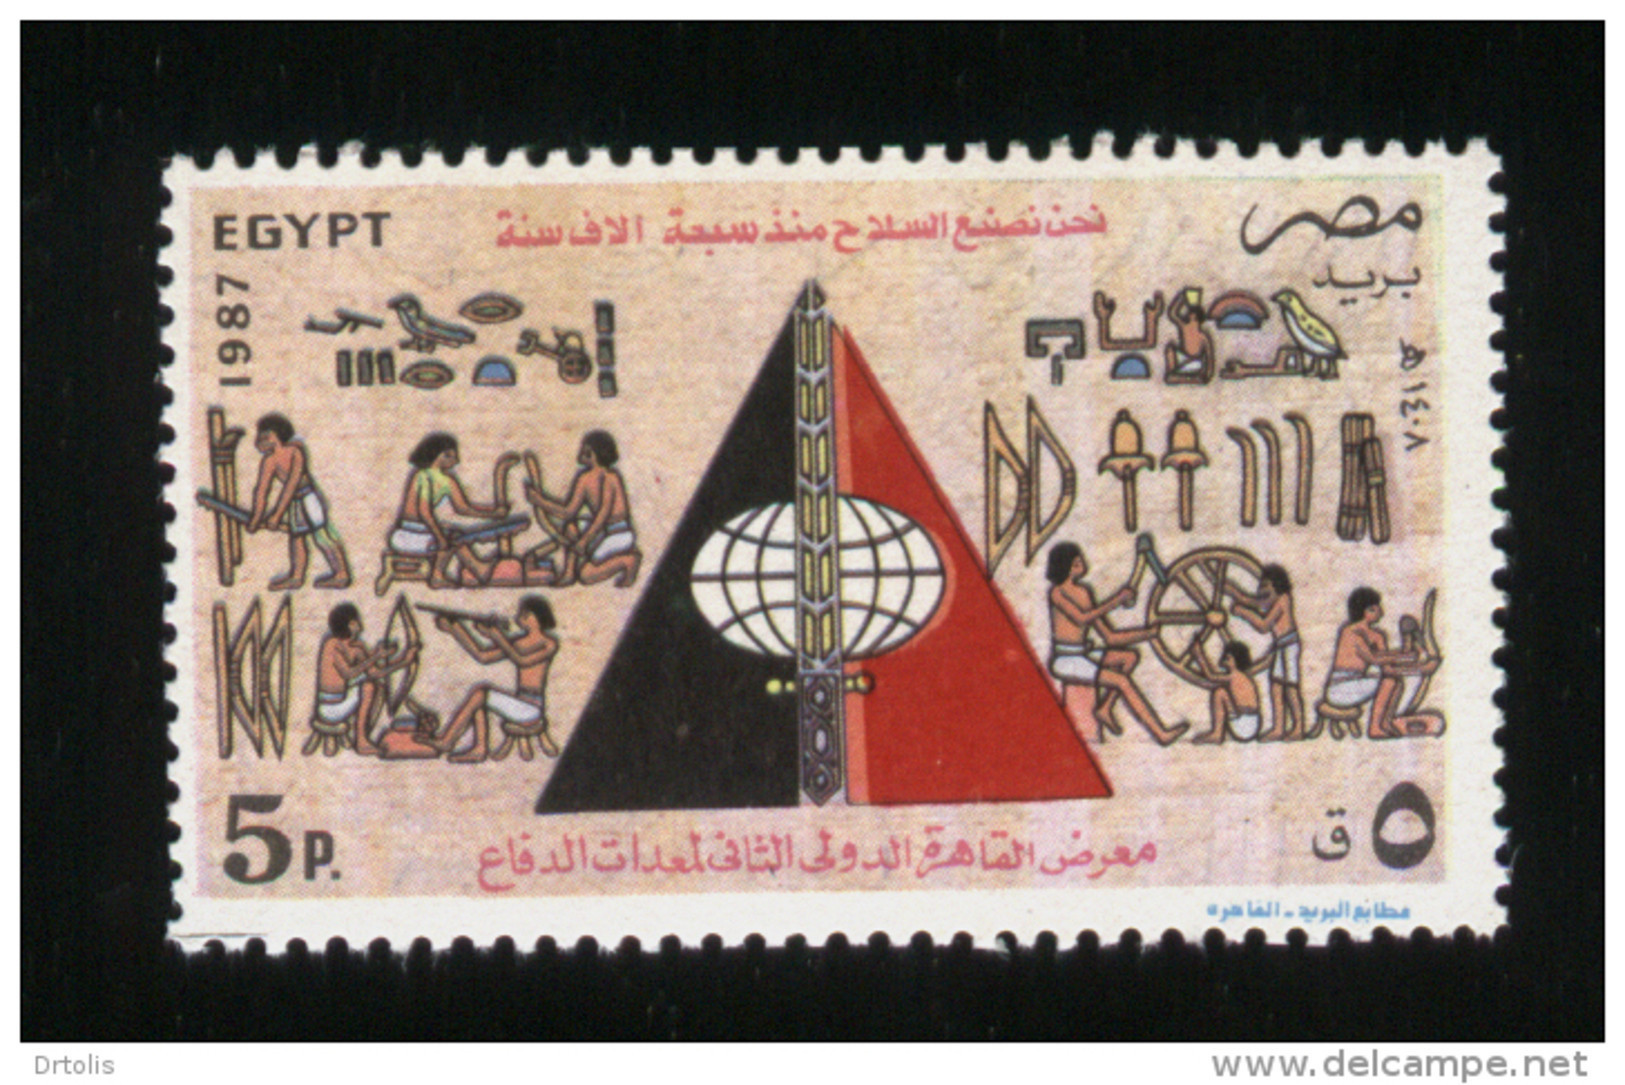 EGYPT / 1987 / INTL. DEFENCE EQUIPMENT EXHIBITION / ANCIENT EGYPTIANS MAKING WEAPONS / MNH / VF - Ungebraucht